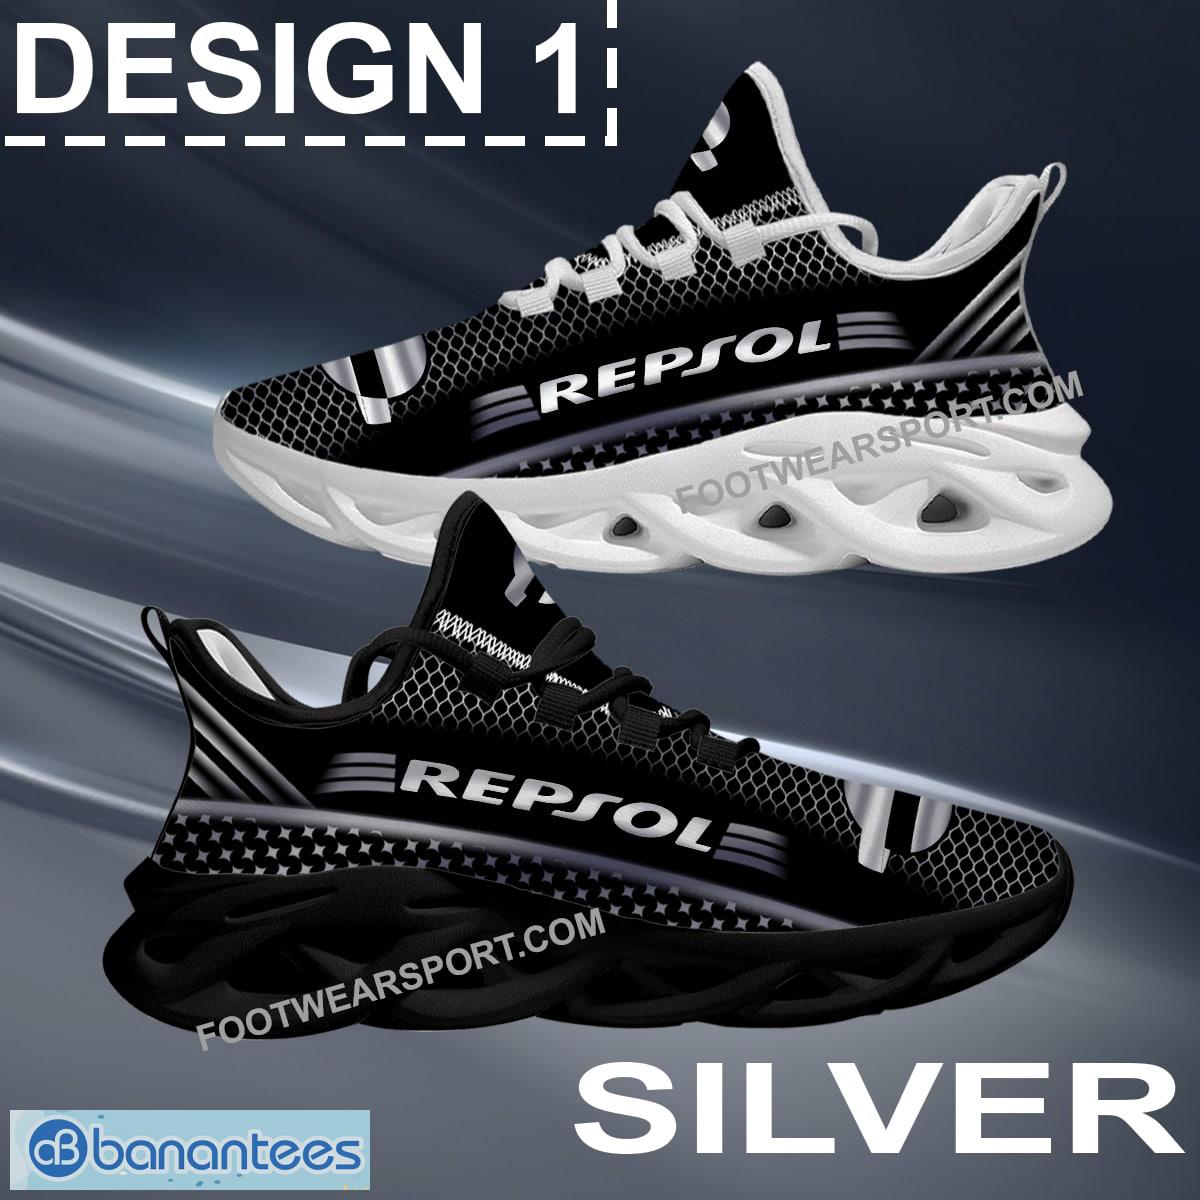 Repsol Max Soul Shoes Gold, Diamond, Silver All Over Print Imagery Chunky Sneaker Gift - Brand Repsol Max Soul Shoes Style 1